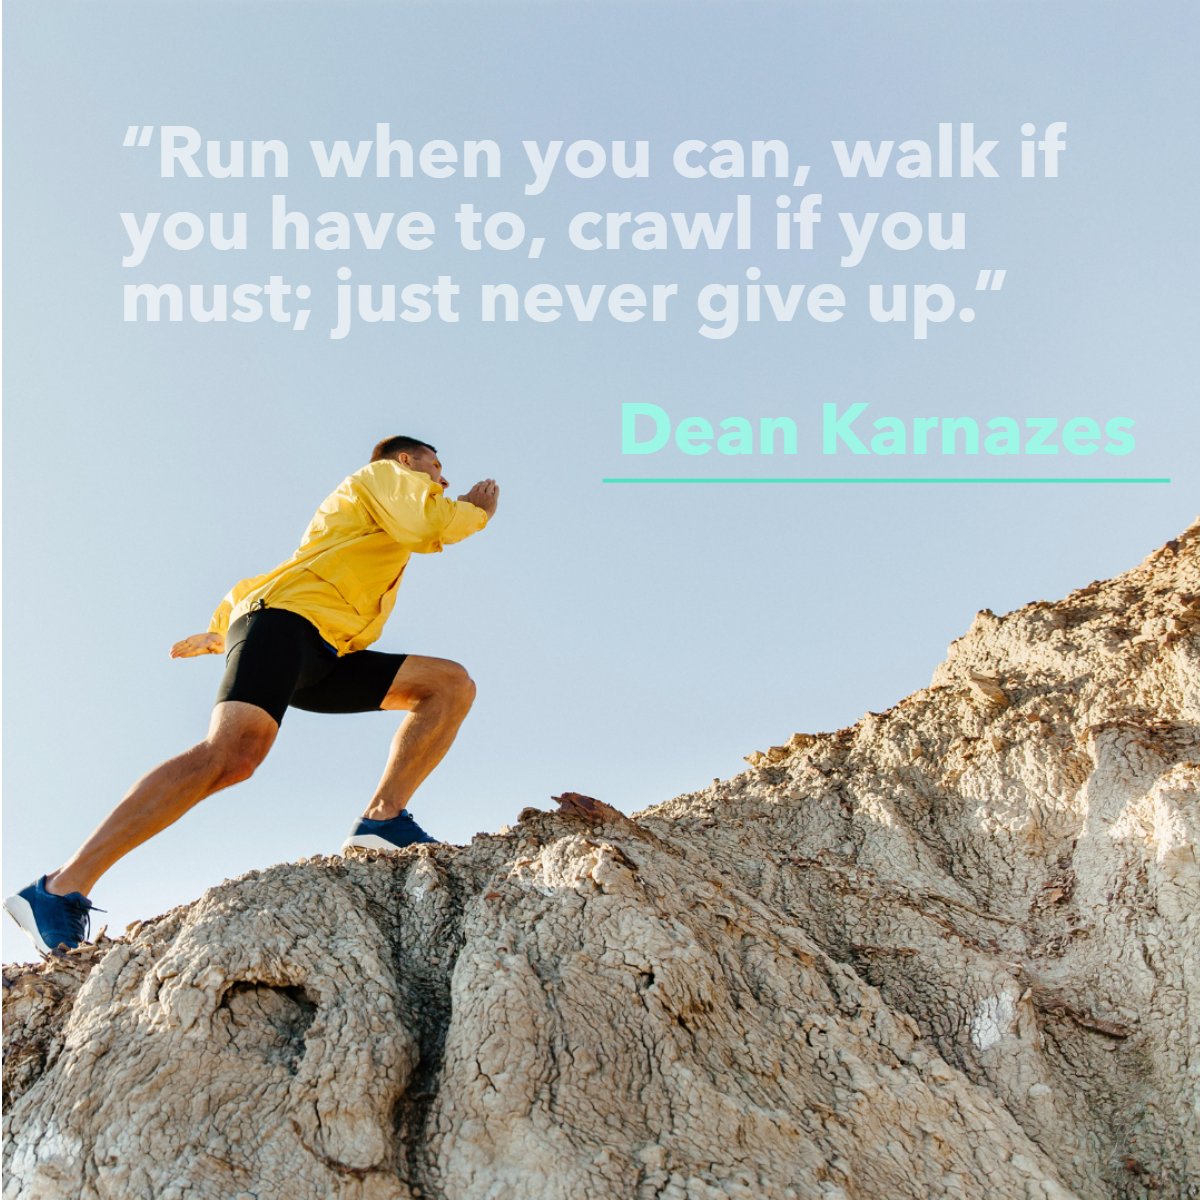 “Run when you can, walk if you have to, crawl if you must; just never give up.”
― Dean Karnazes
#realestateagent #investors #firsttimehomebuyer #militaryhomebuyers #homebuyers #realestateusa #housegoals #realestategoals #REALTOR #ColumbiaSCrealestate #househunting